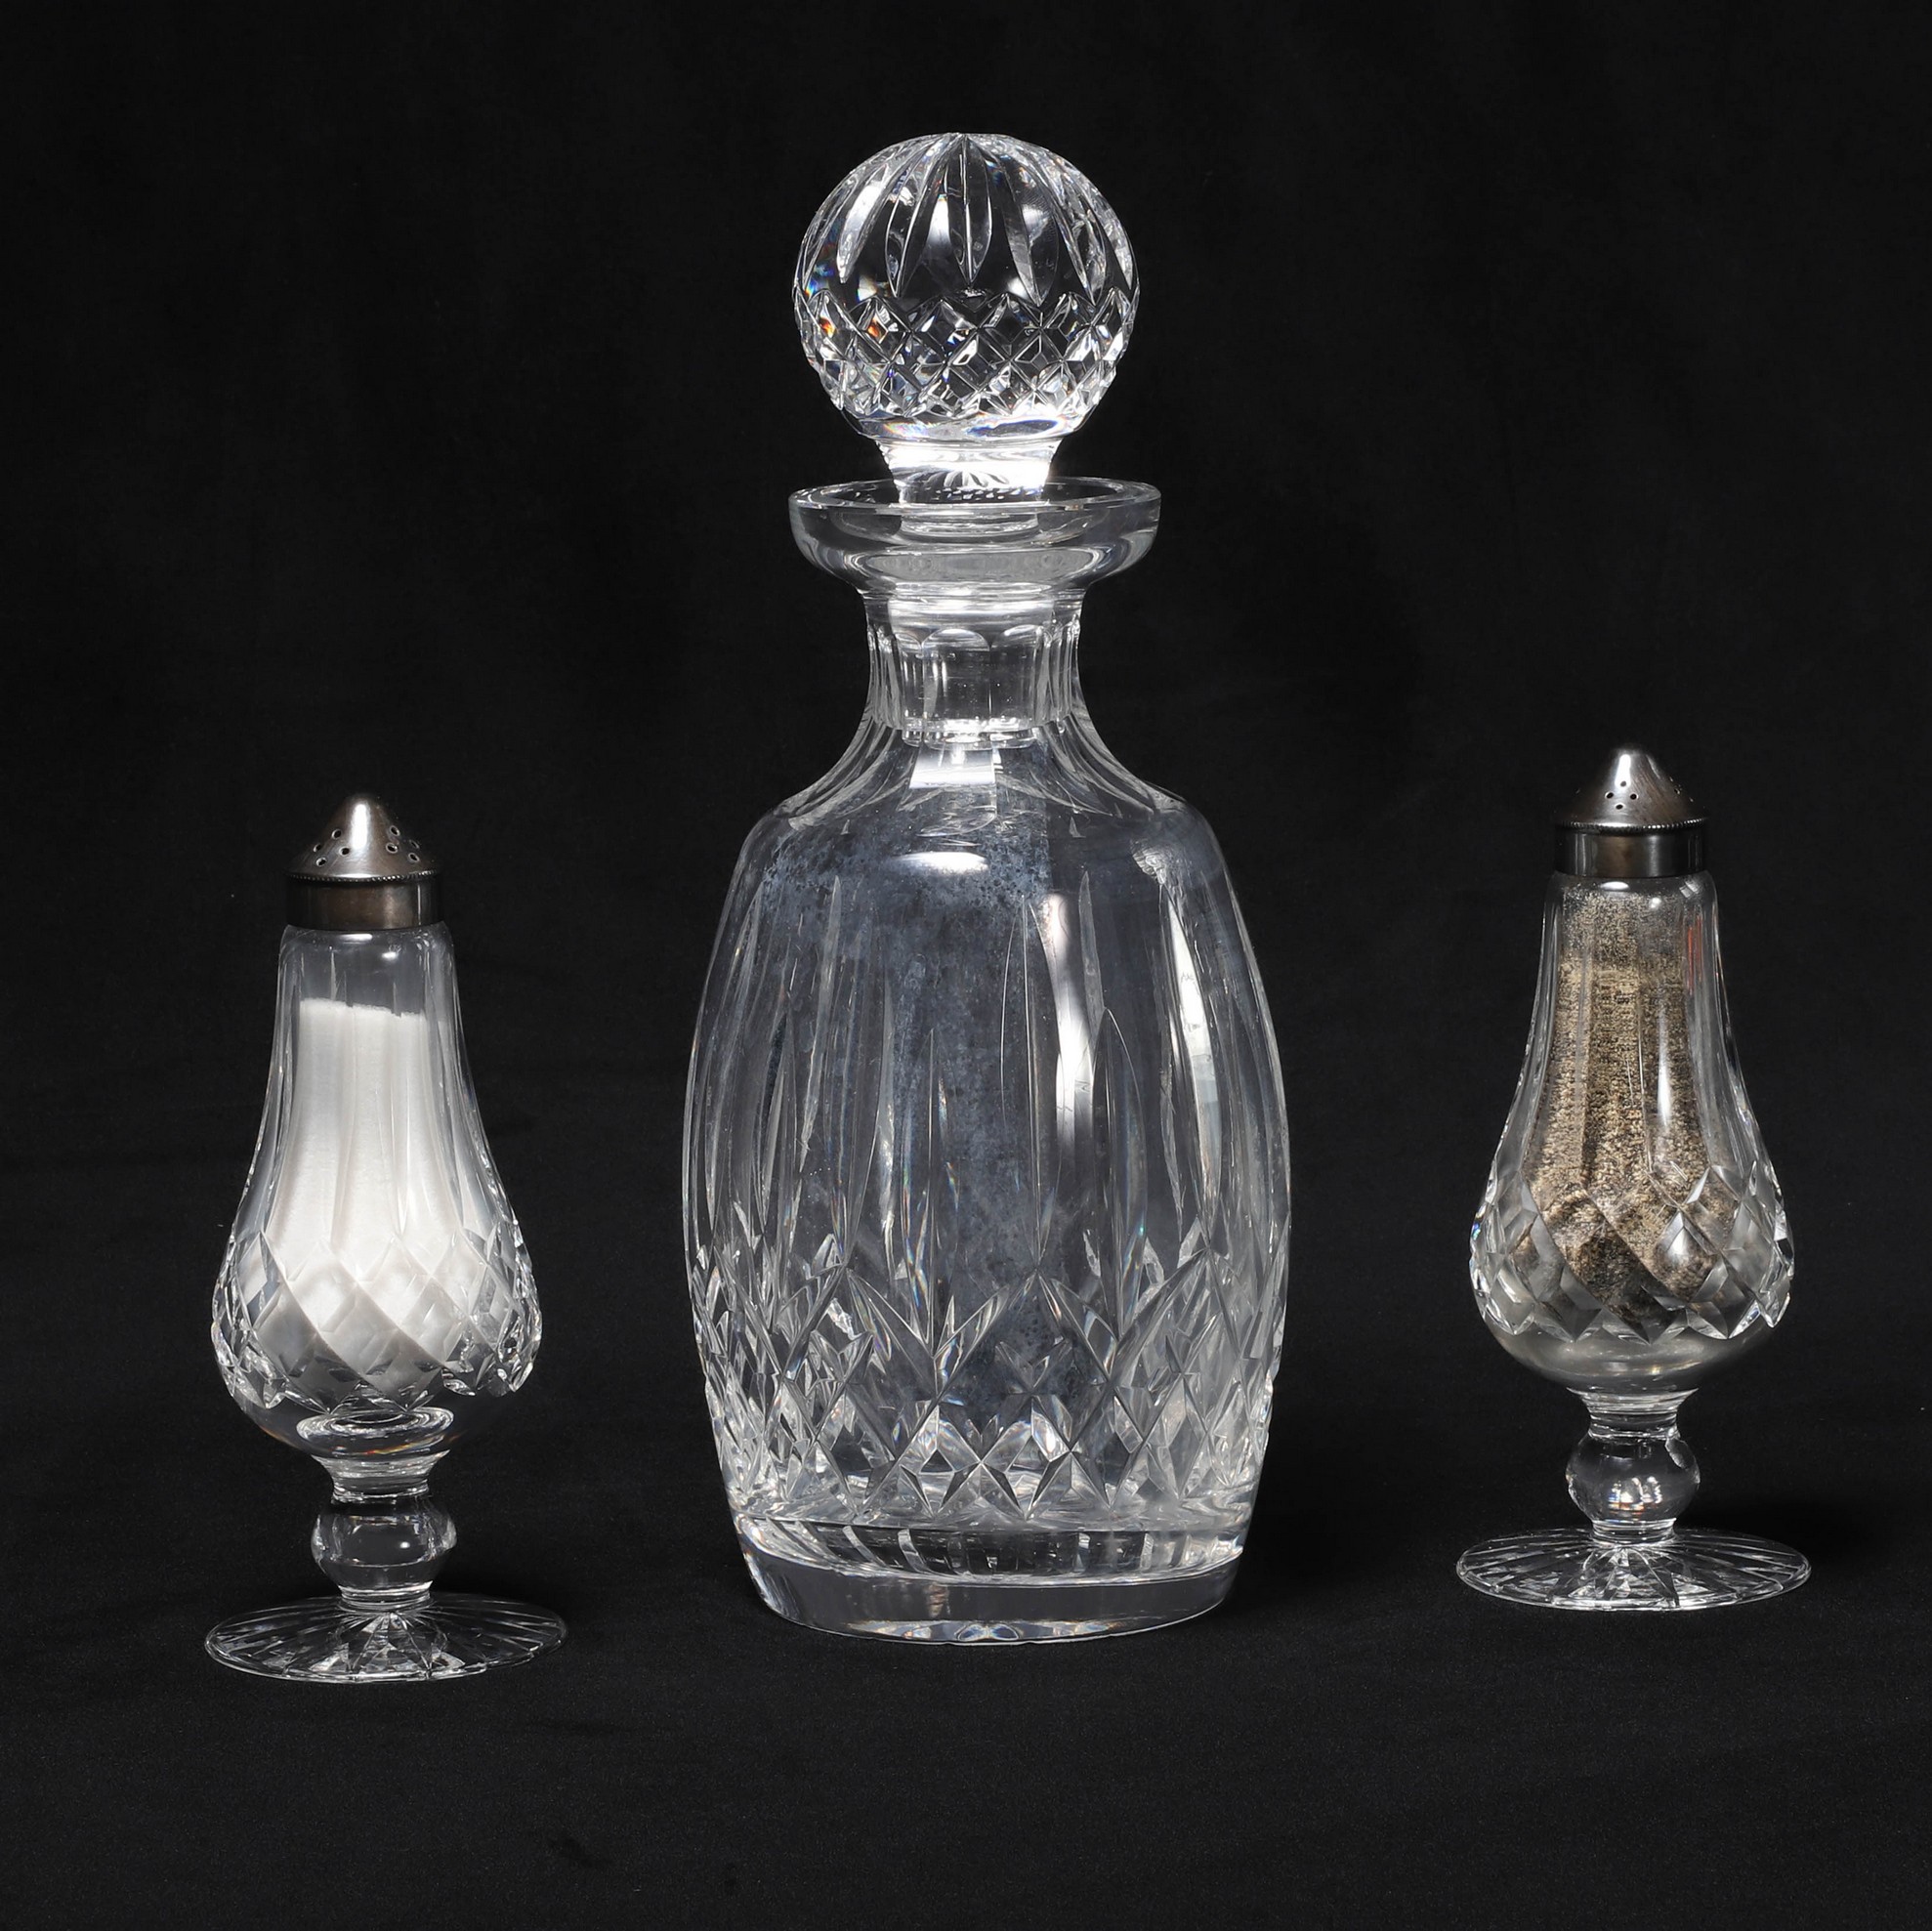  3 Pcs Waterford Lismore crystal  27a5d7